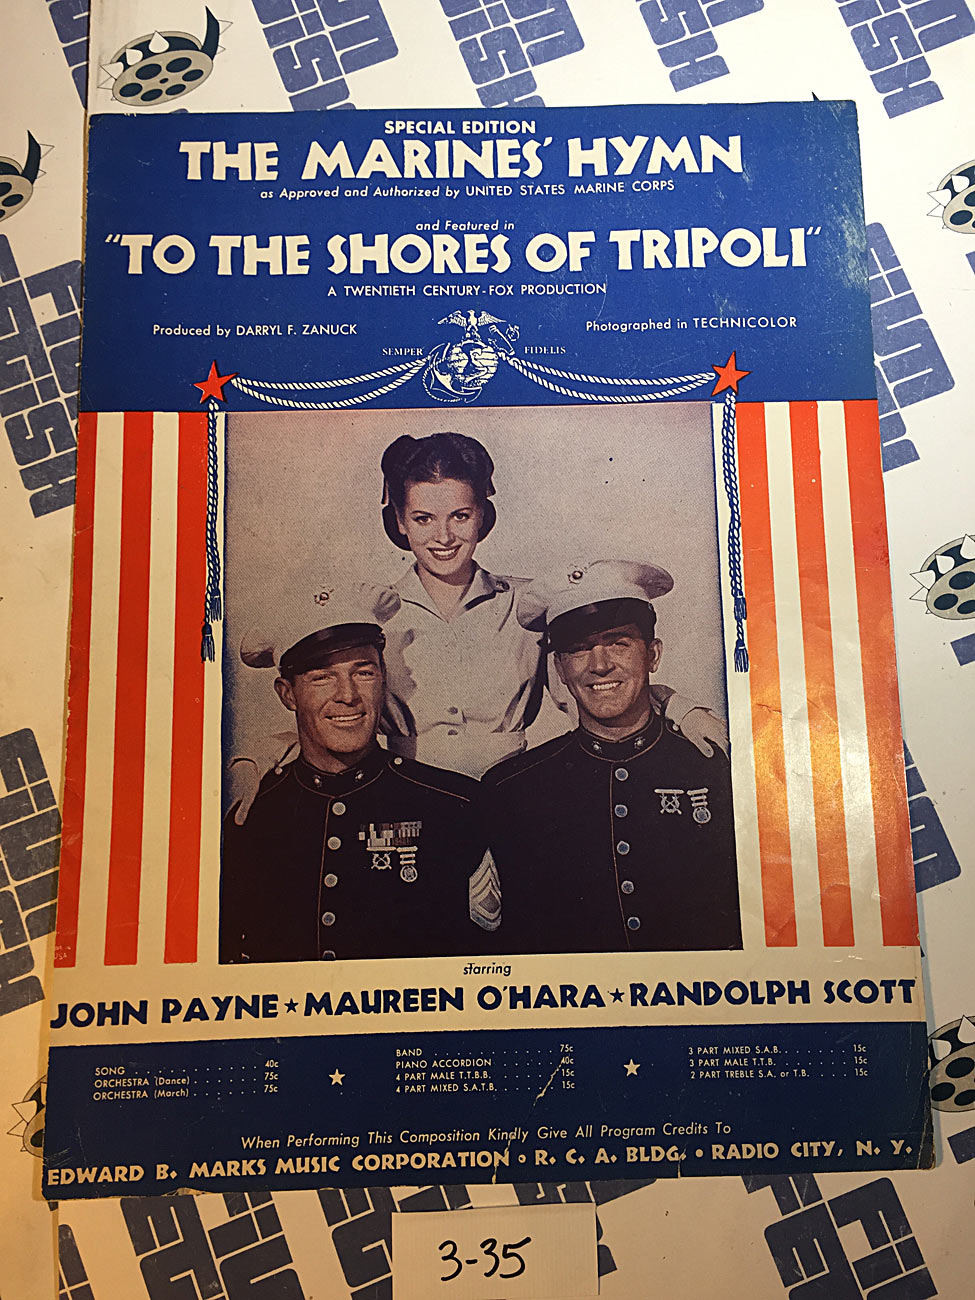 Special Edition The Marines Hymn To The Shores of Tripoli Sheet Music [335]